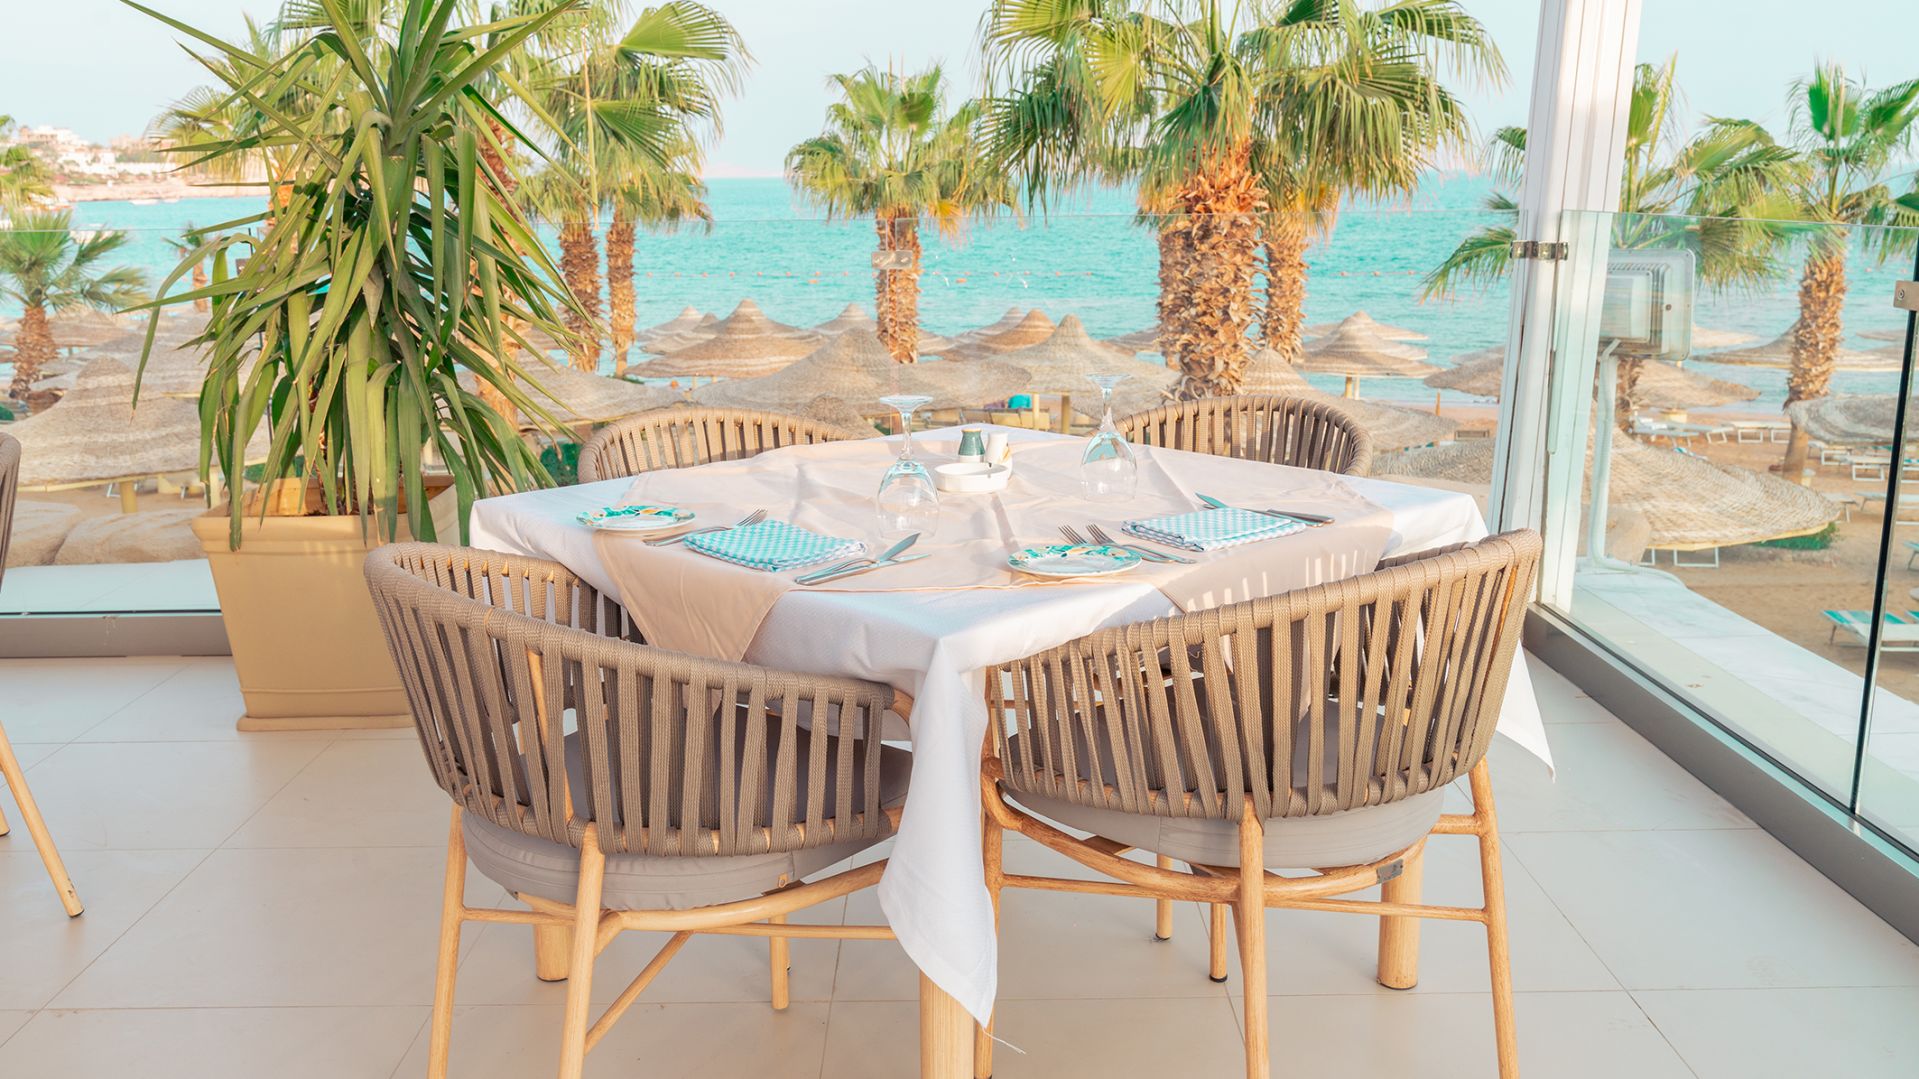 A Table With Chairs Around It By A Beach